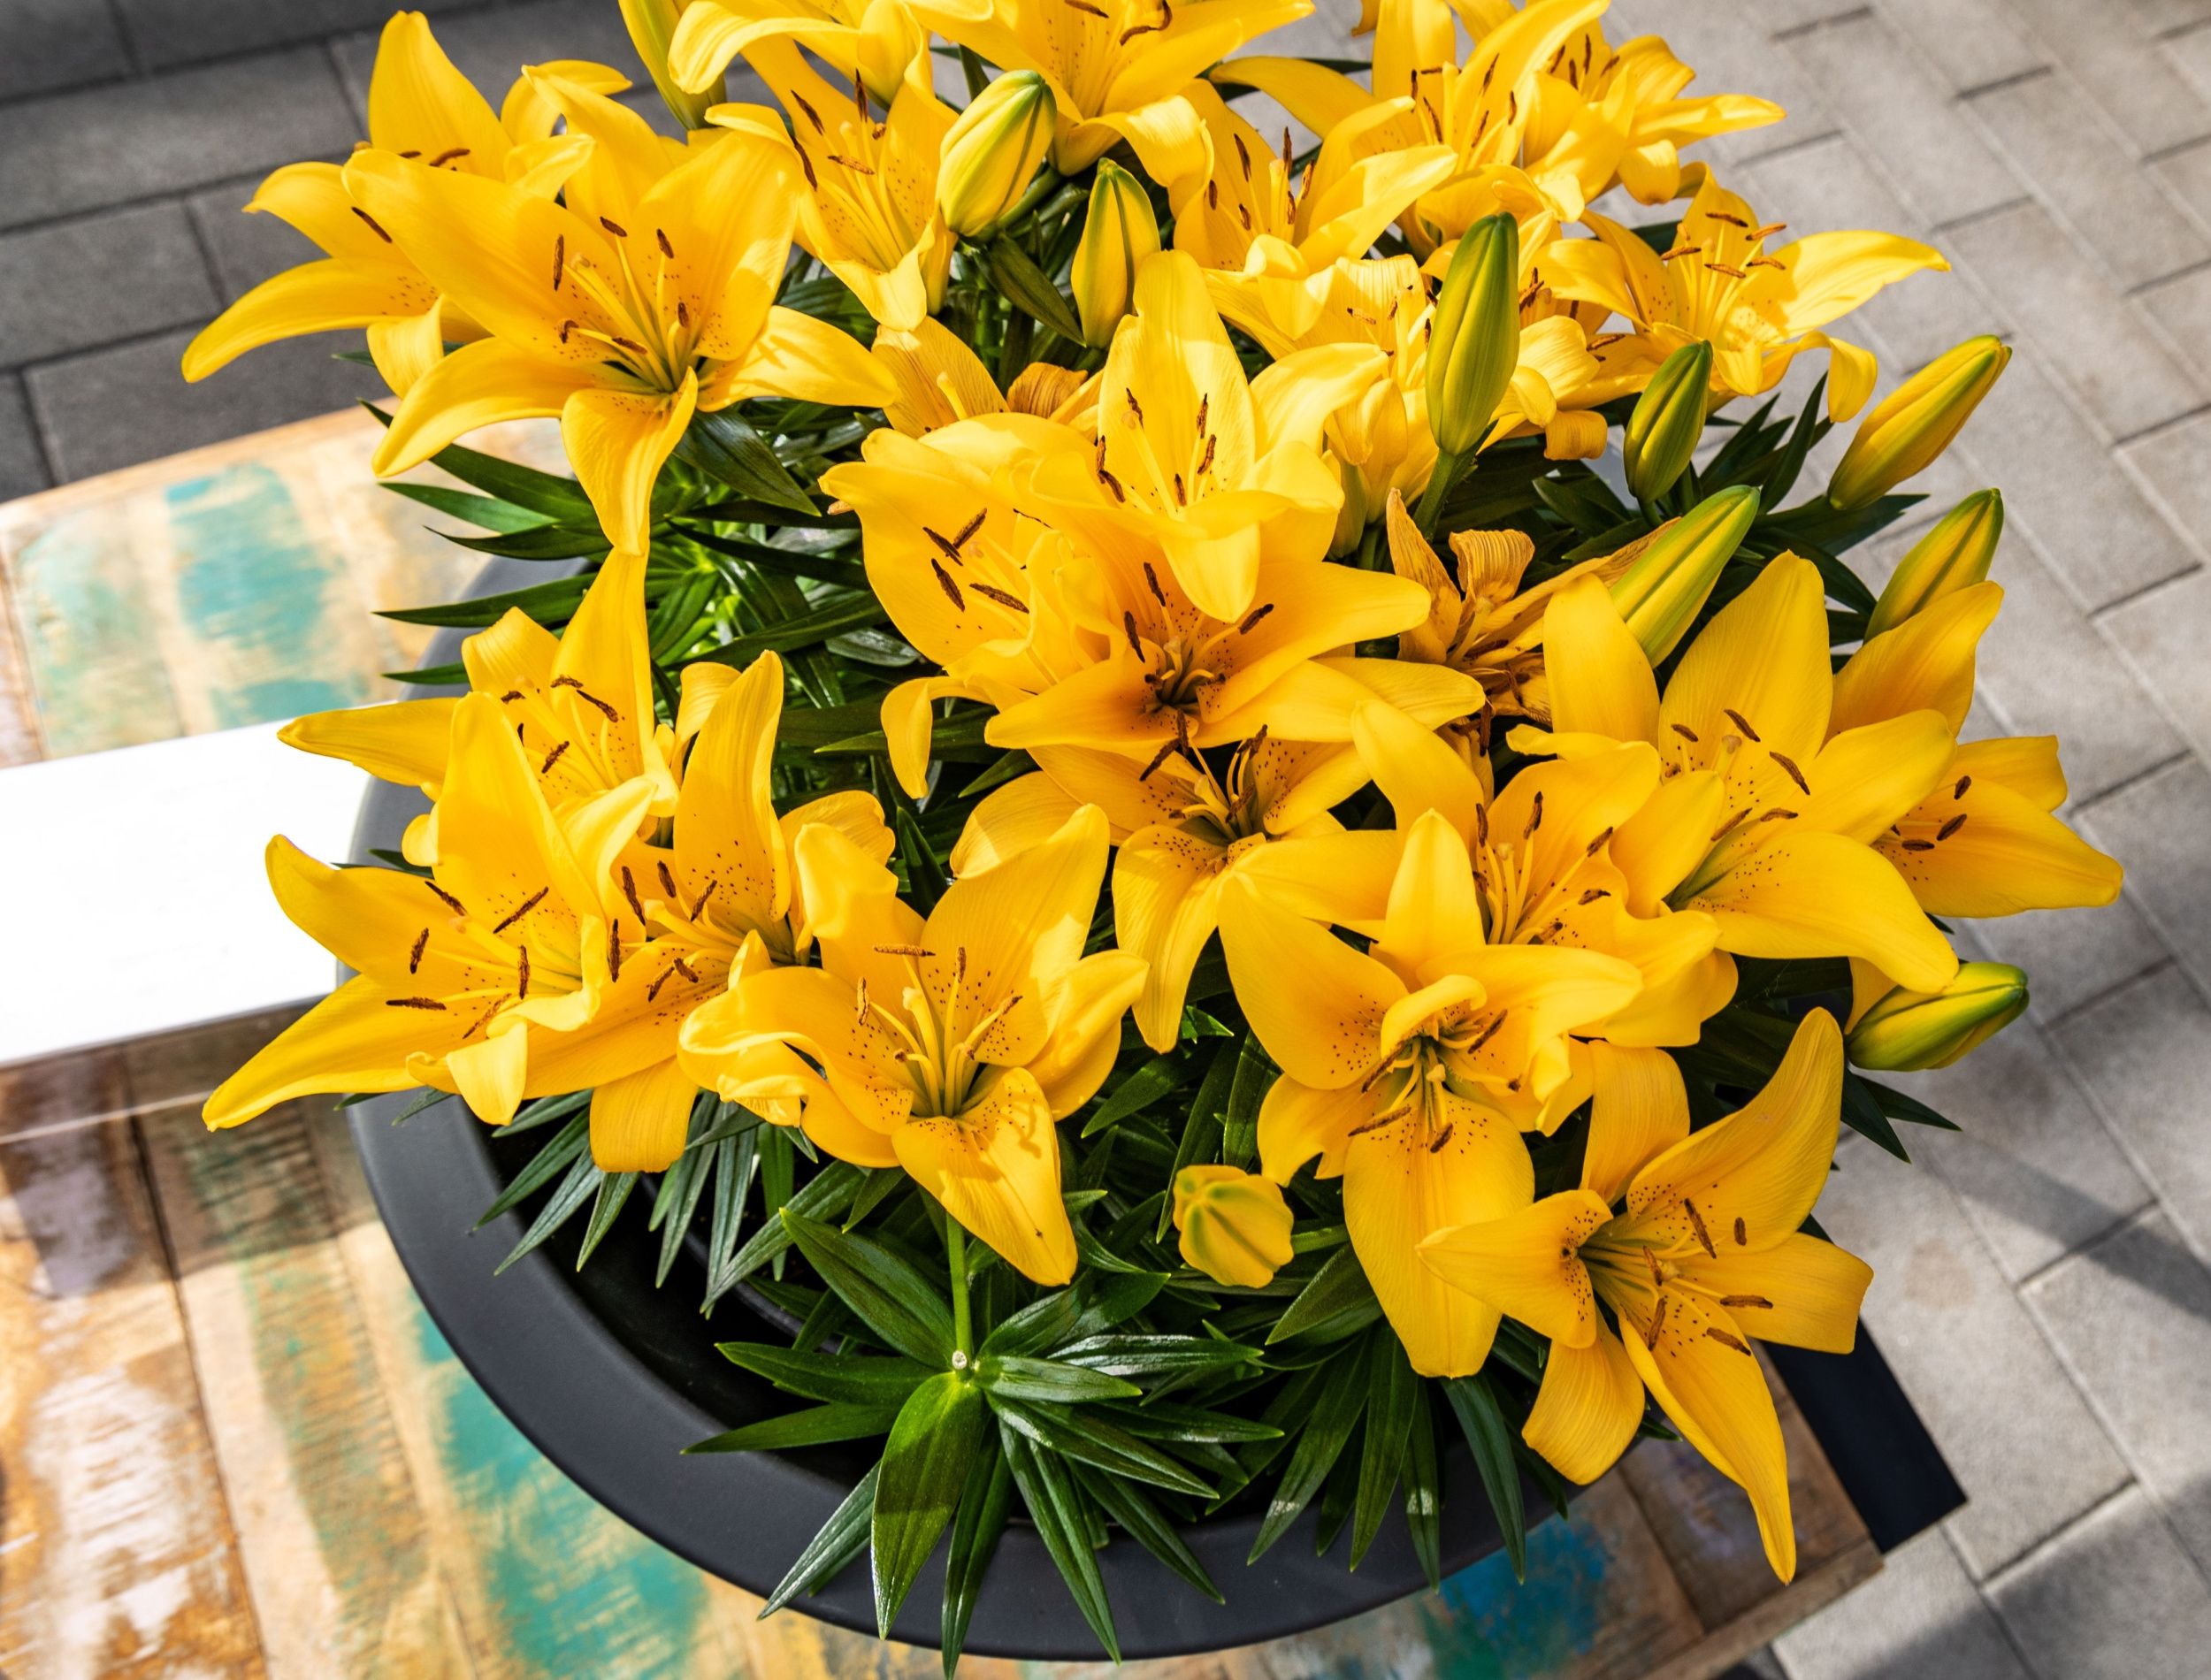 5 Best Lilies To Grow in Containers